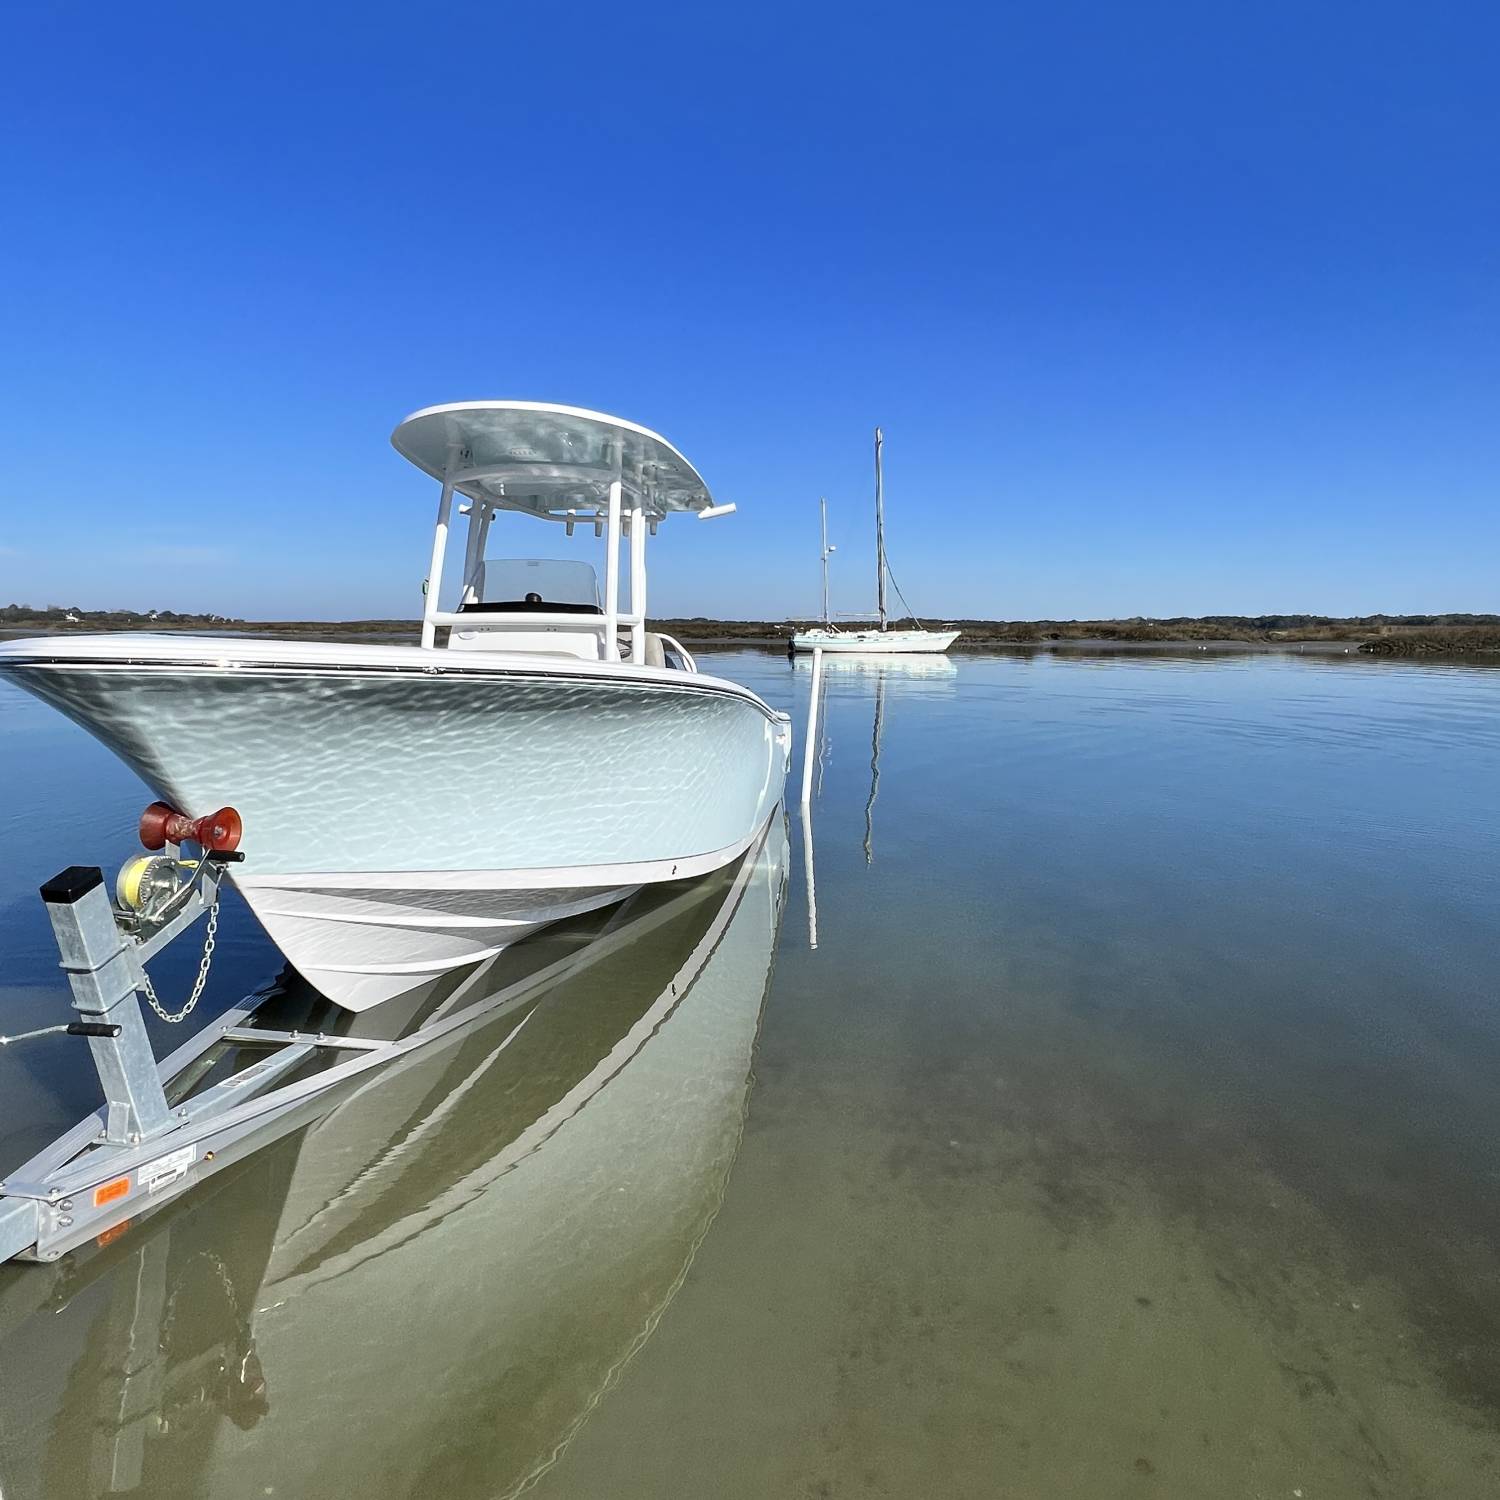 This image is of my Heritage 231 Platinum at my favorite boat landing. It was a perfectly calm...